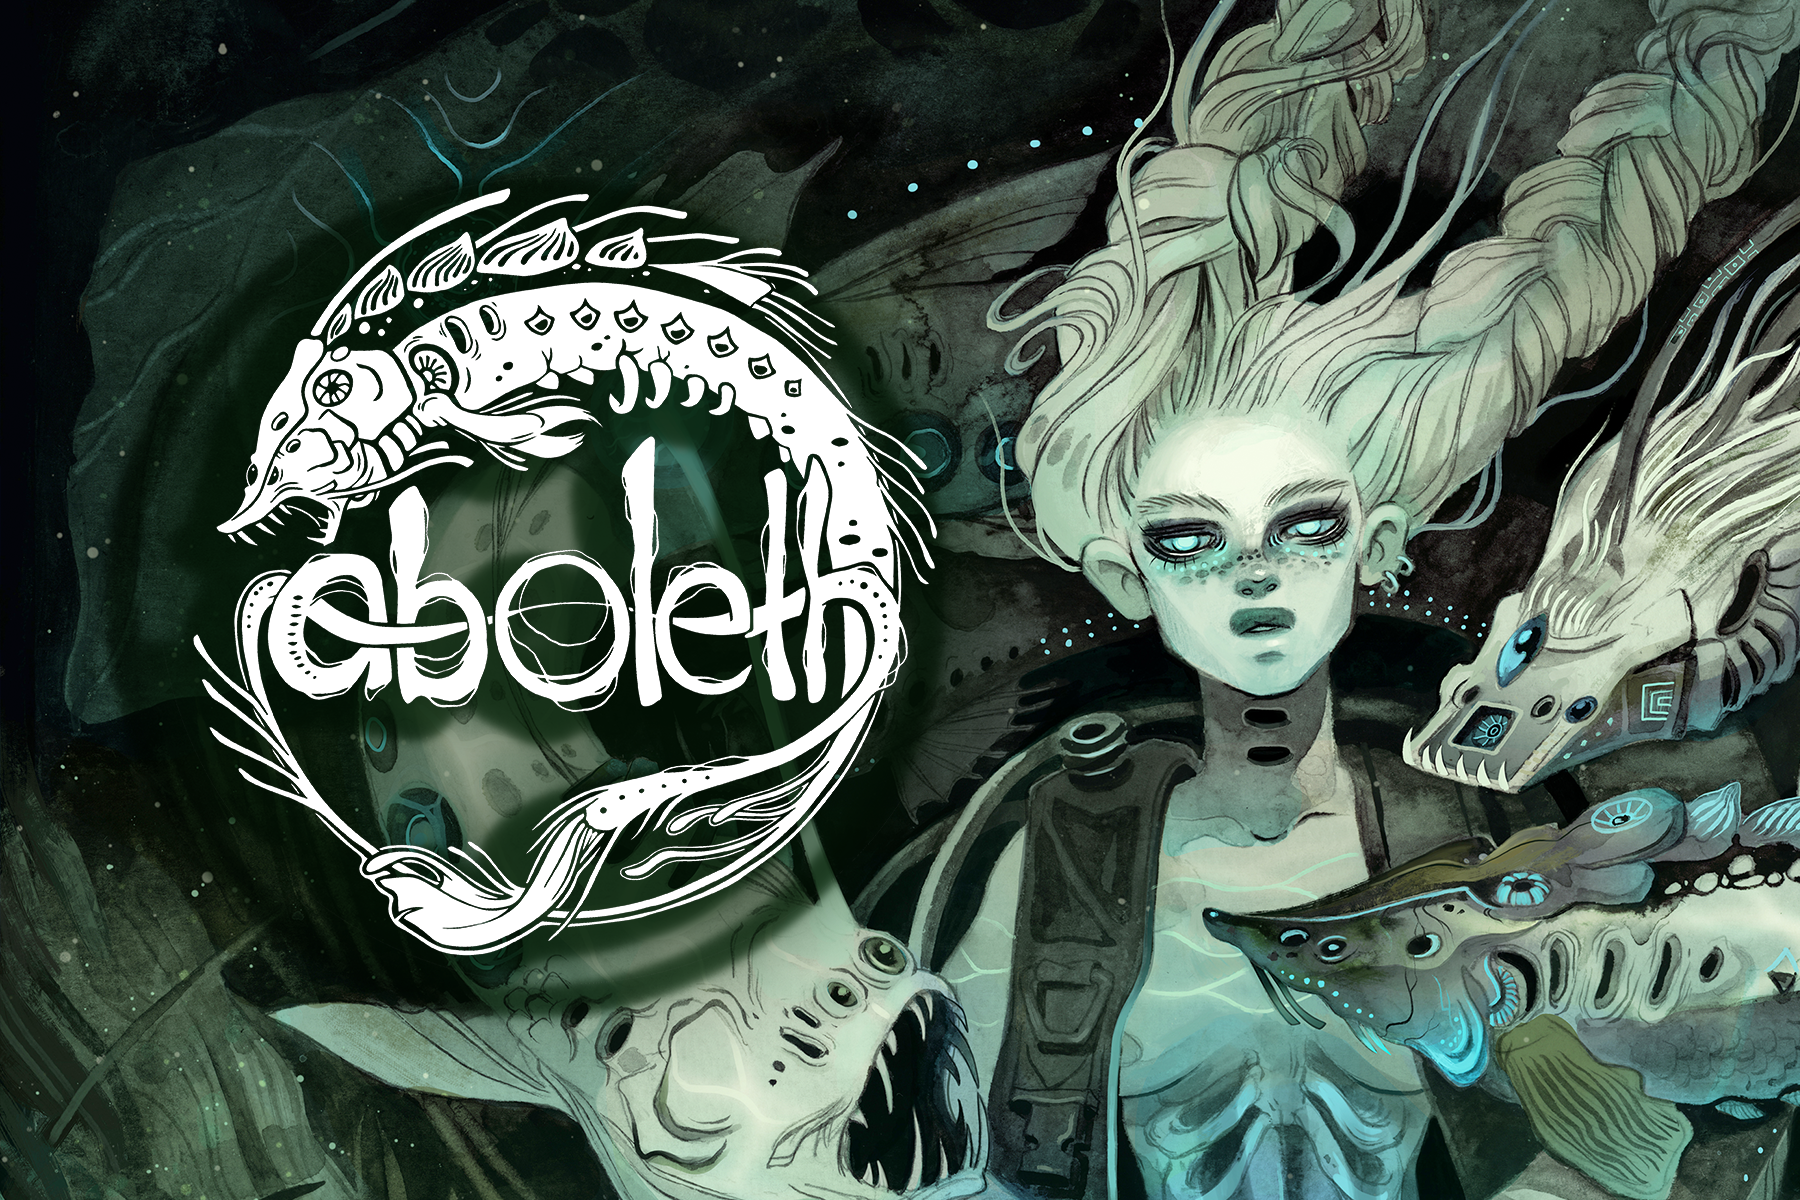 Aboleth Collection Banner for WURMroup store featuring the logo and artwork for their debut album Benthos